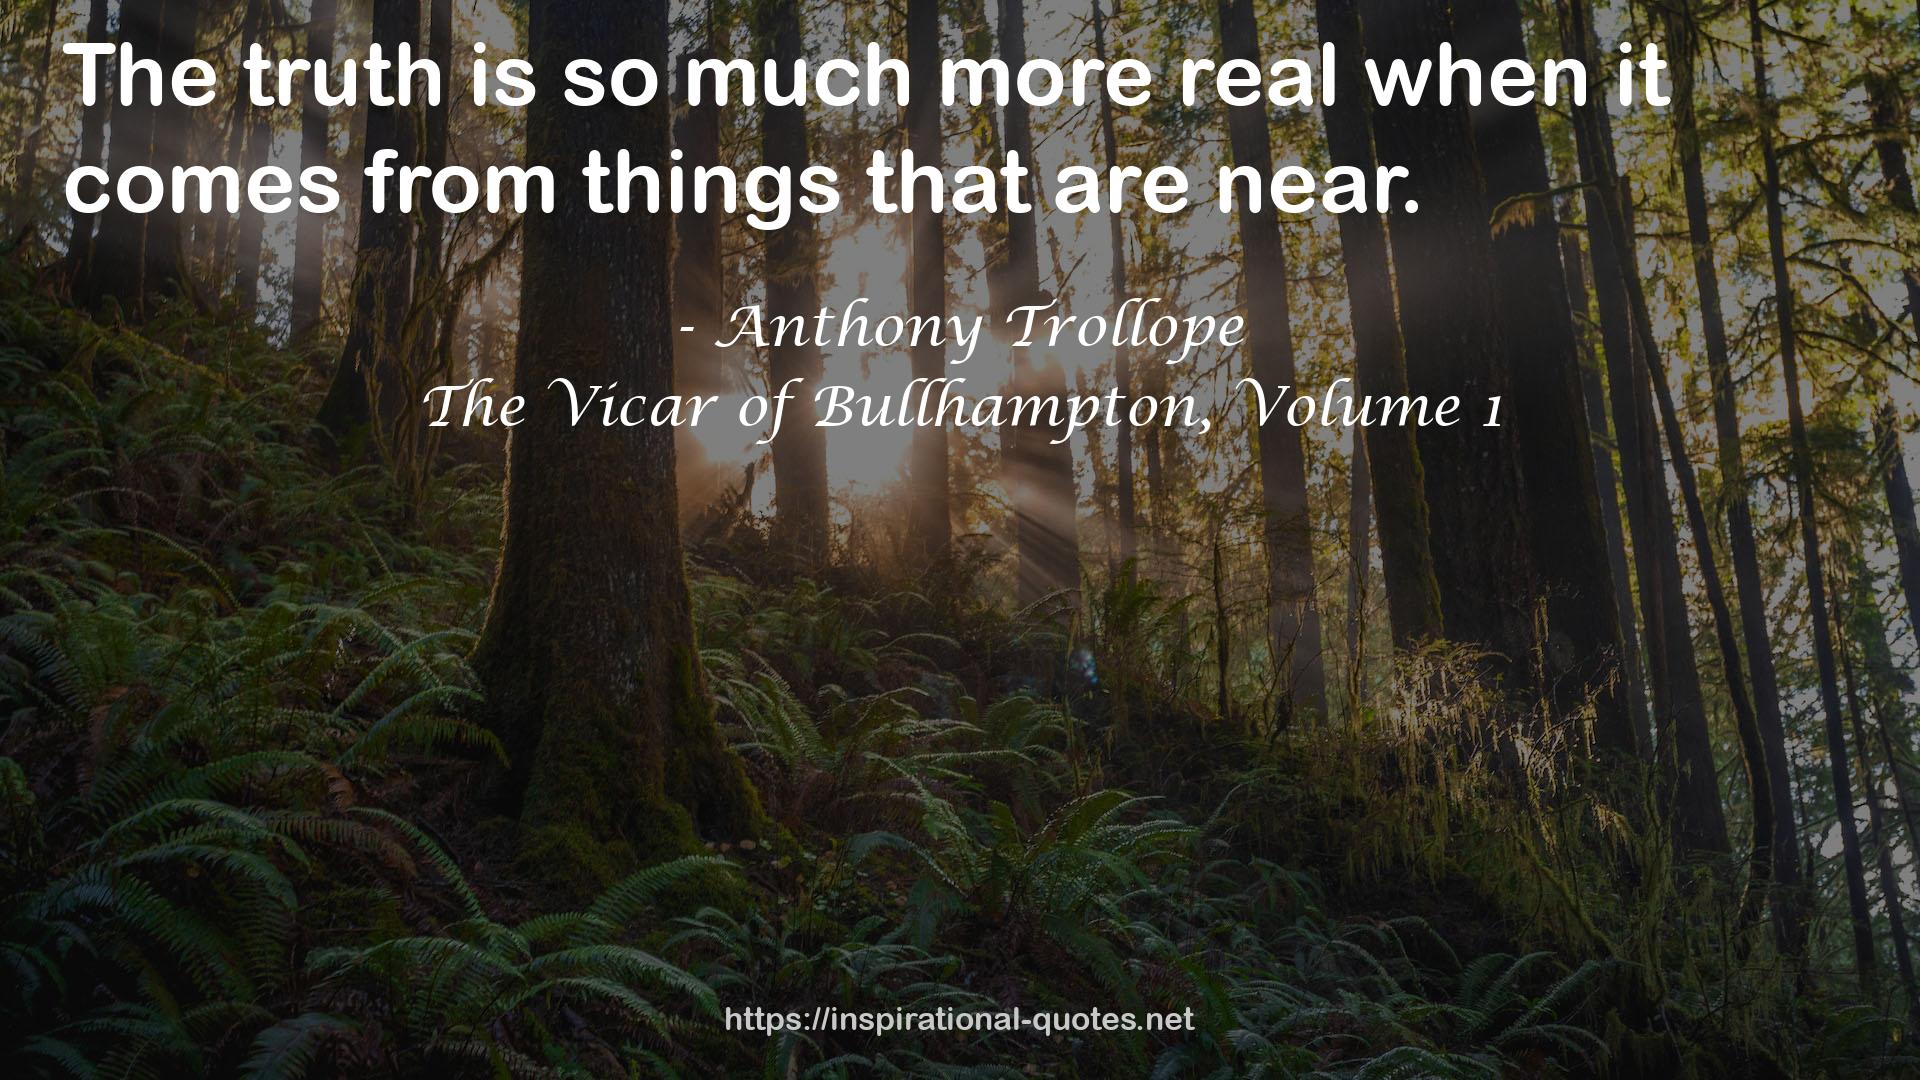 The Vicar of Bullhampton, Volume 1 QUOTES